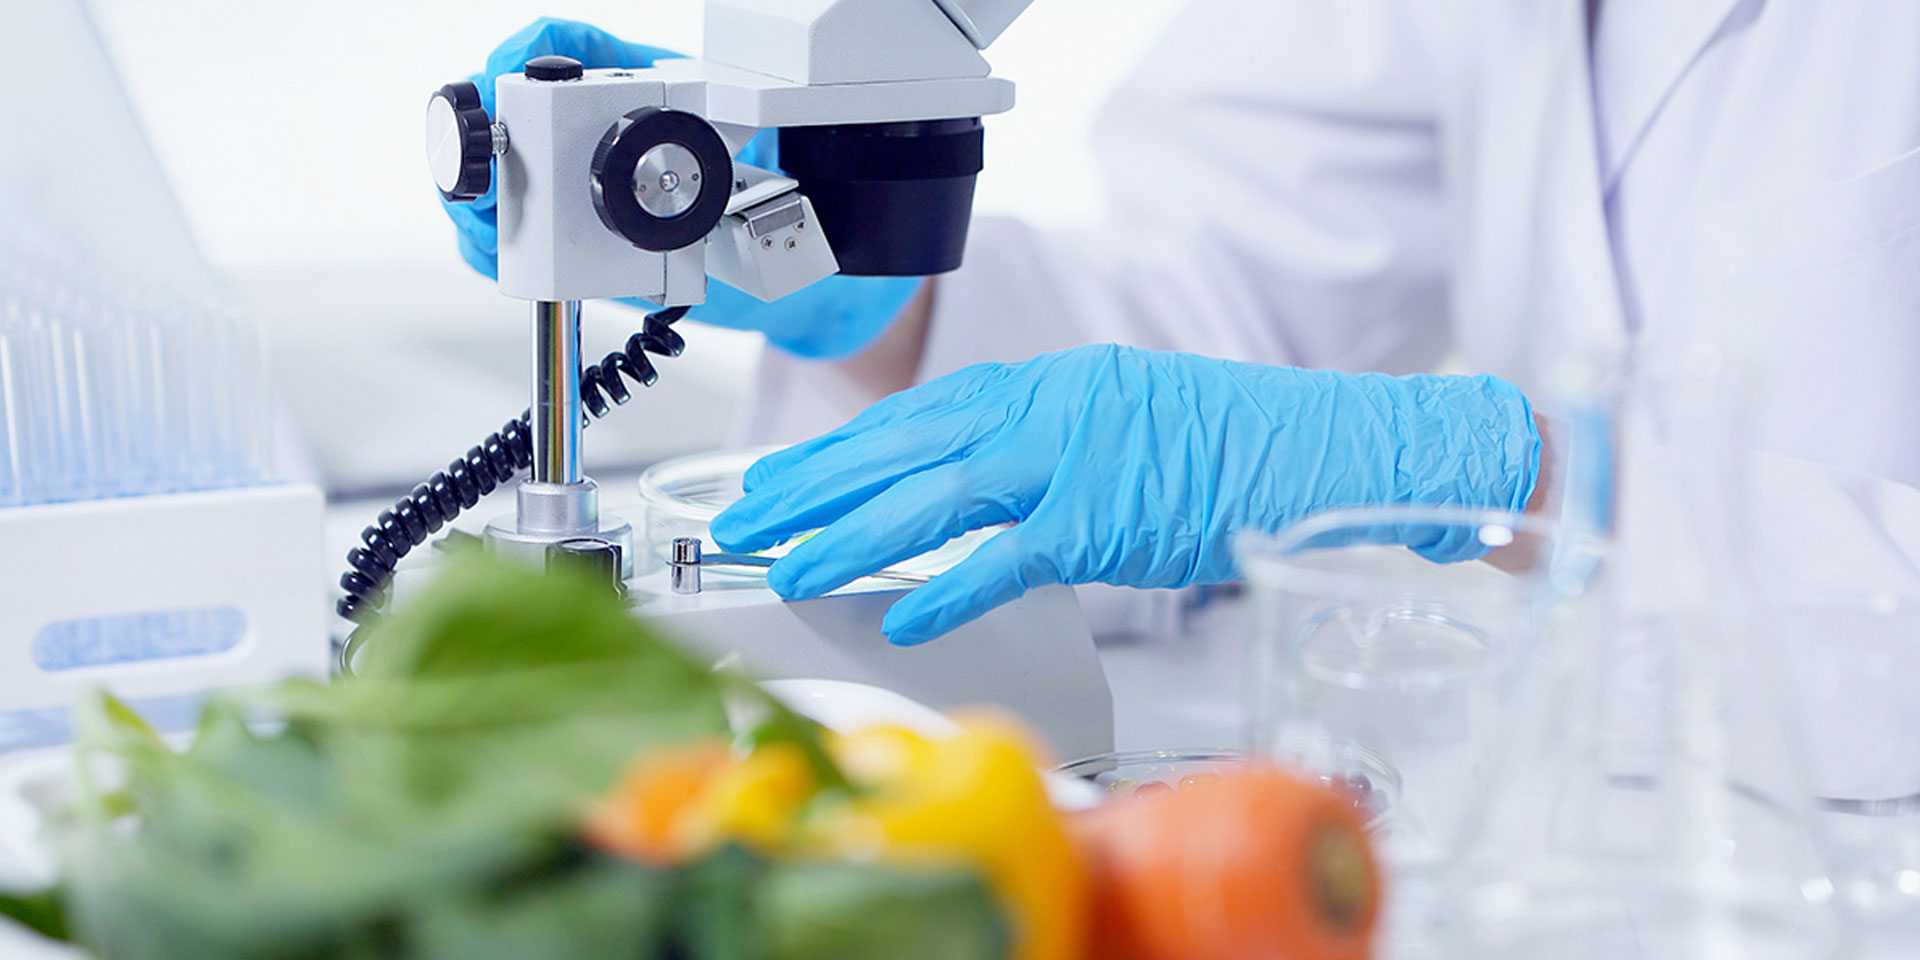 In Singapore, the future of food begins in the laboratory 